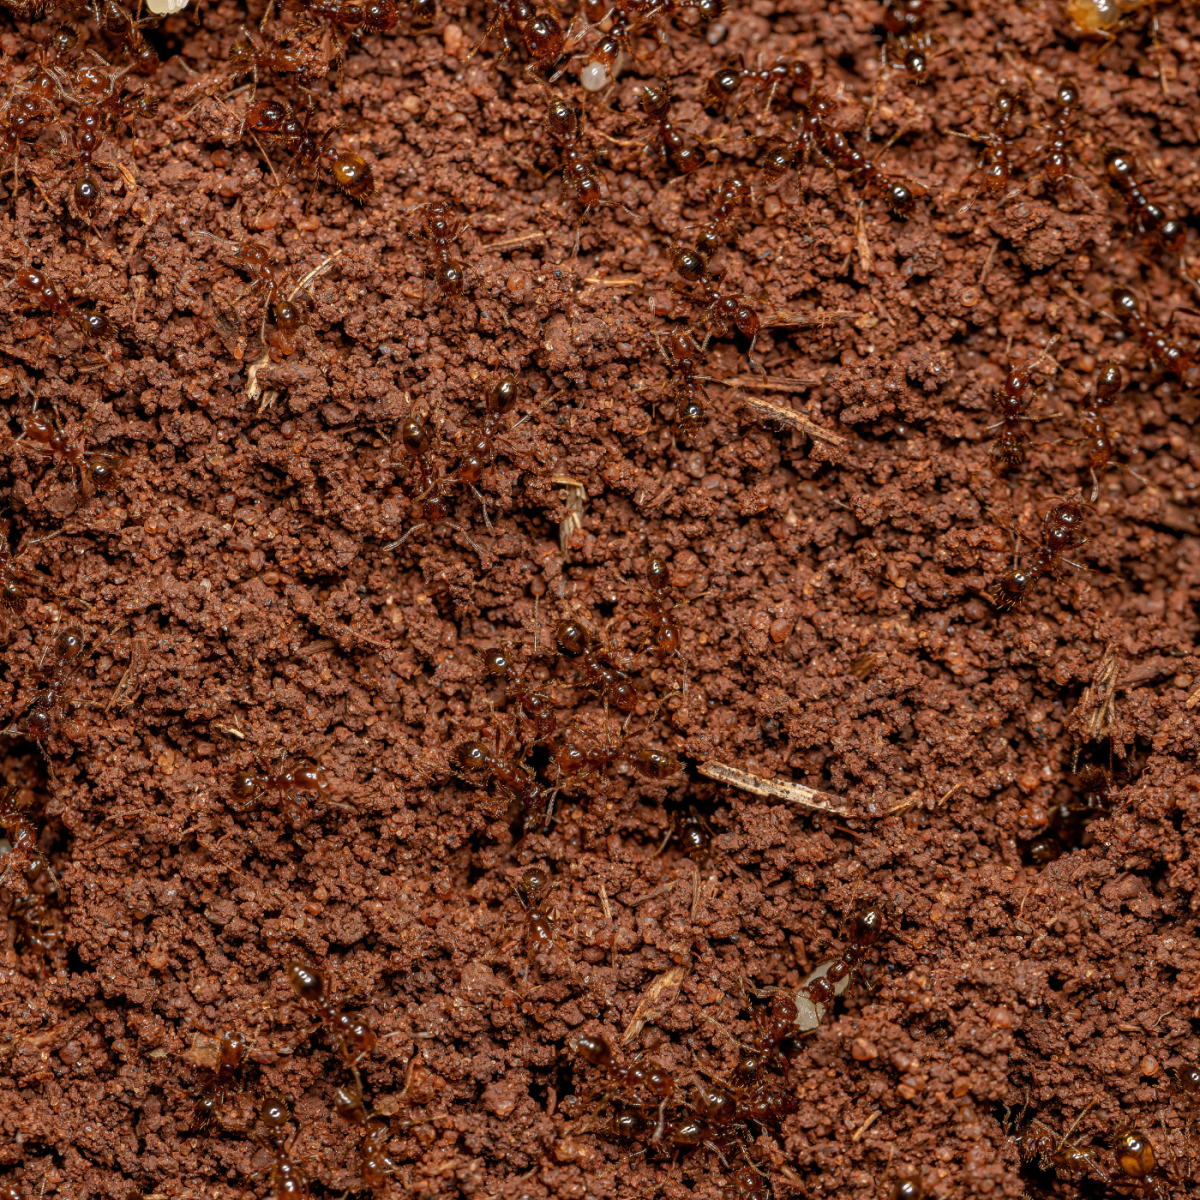 Can you see how many ants are hidden in this photo?